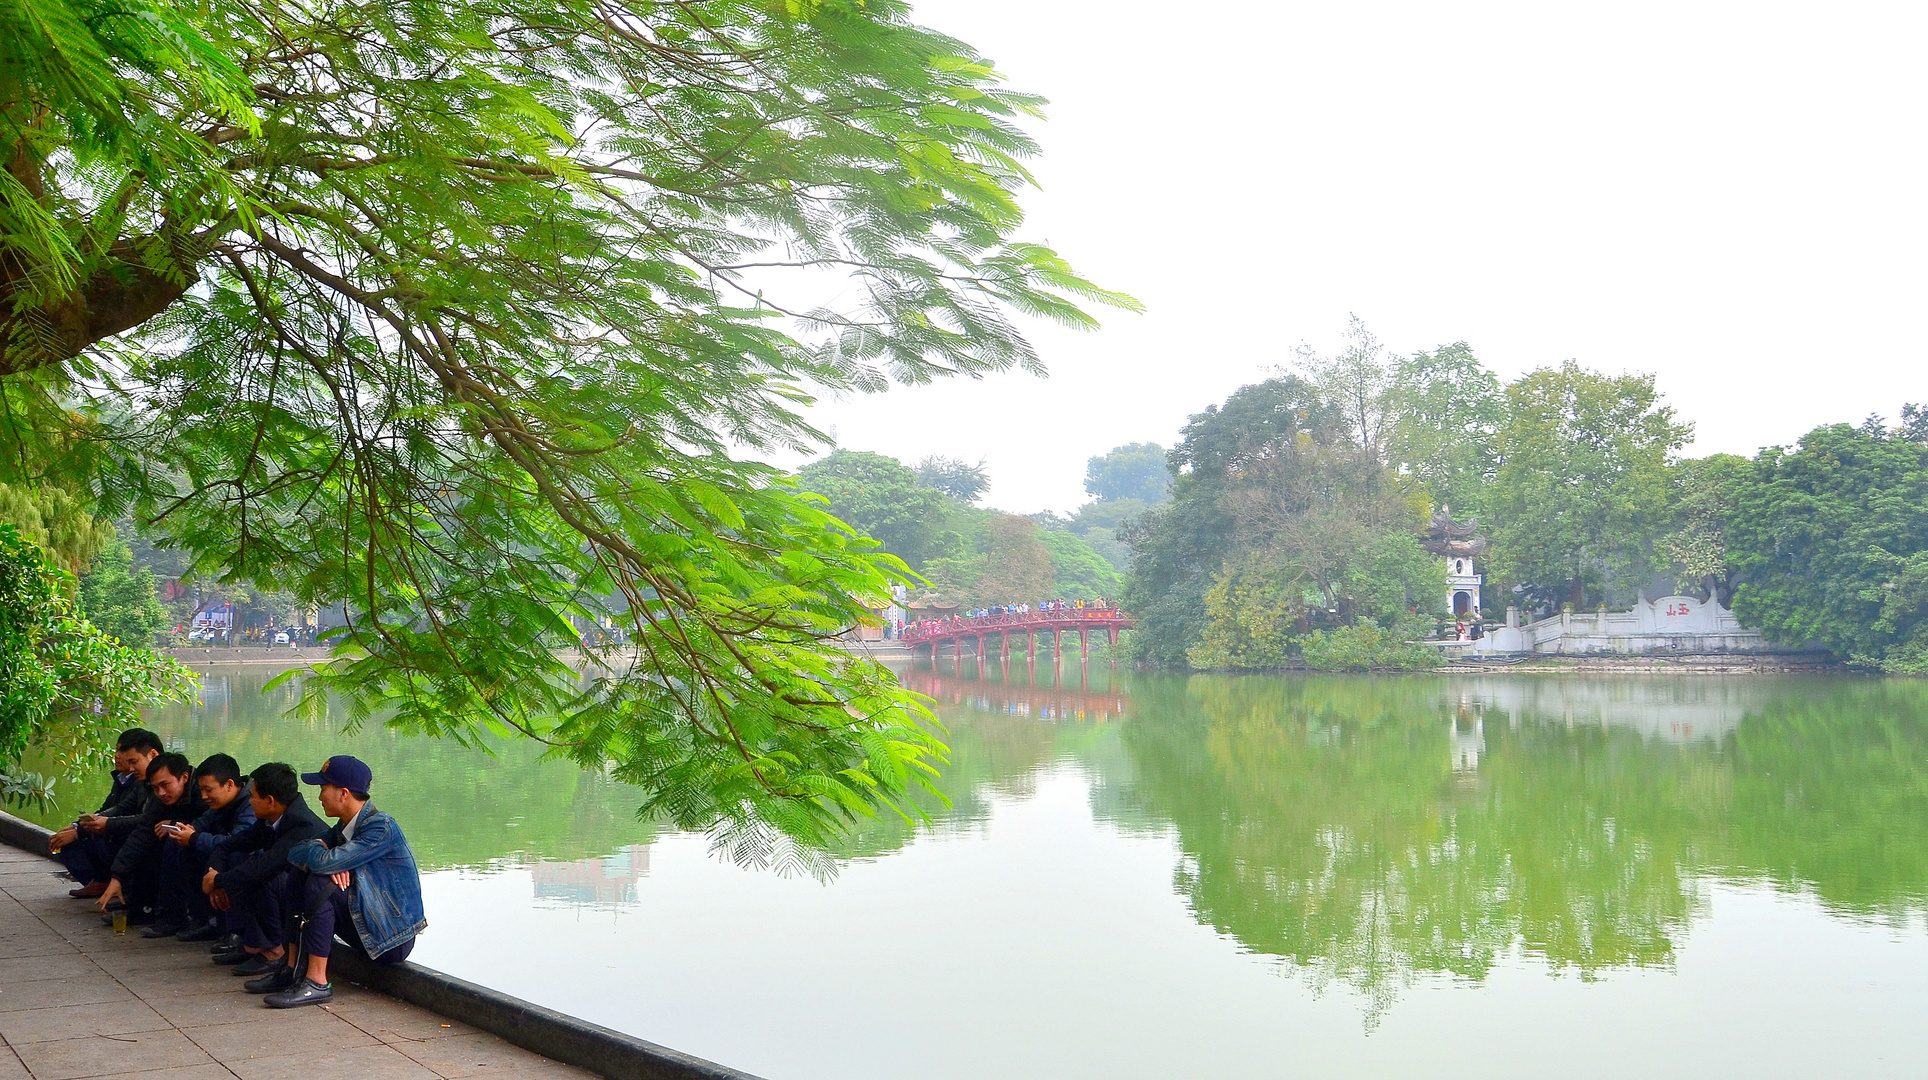 The lake - in the center of Hanoi.